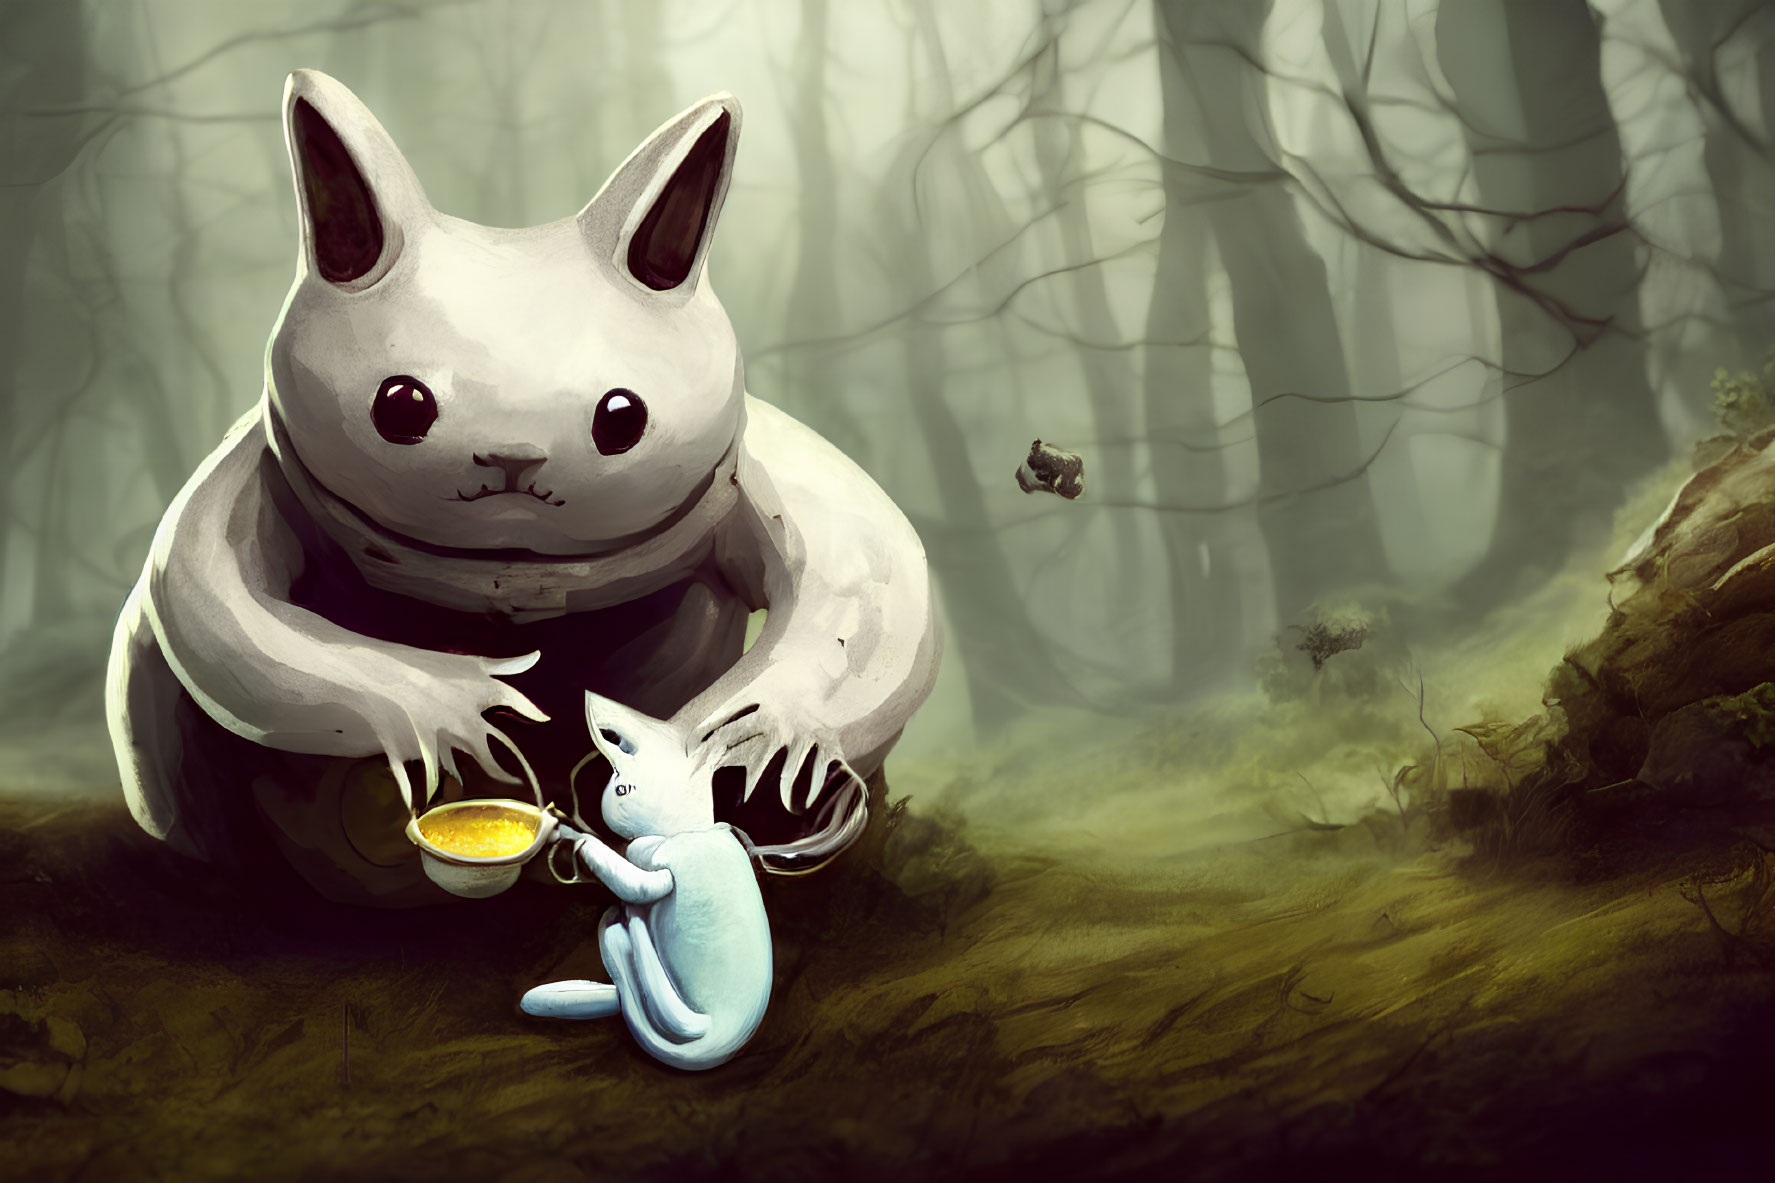 Fantastical white rabbit creature with bowl in misty forest